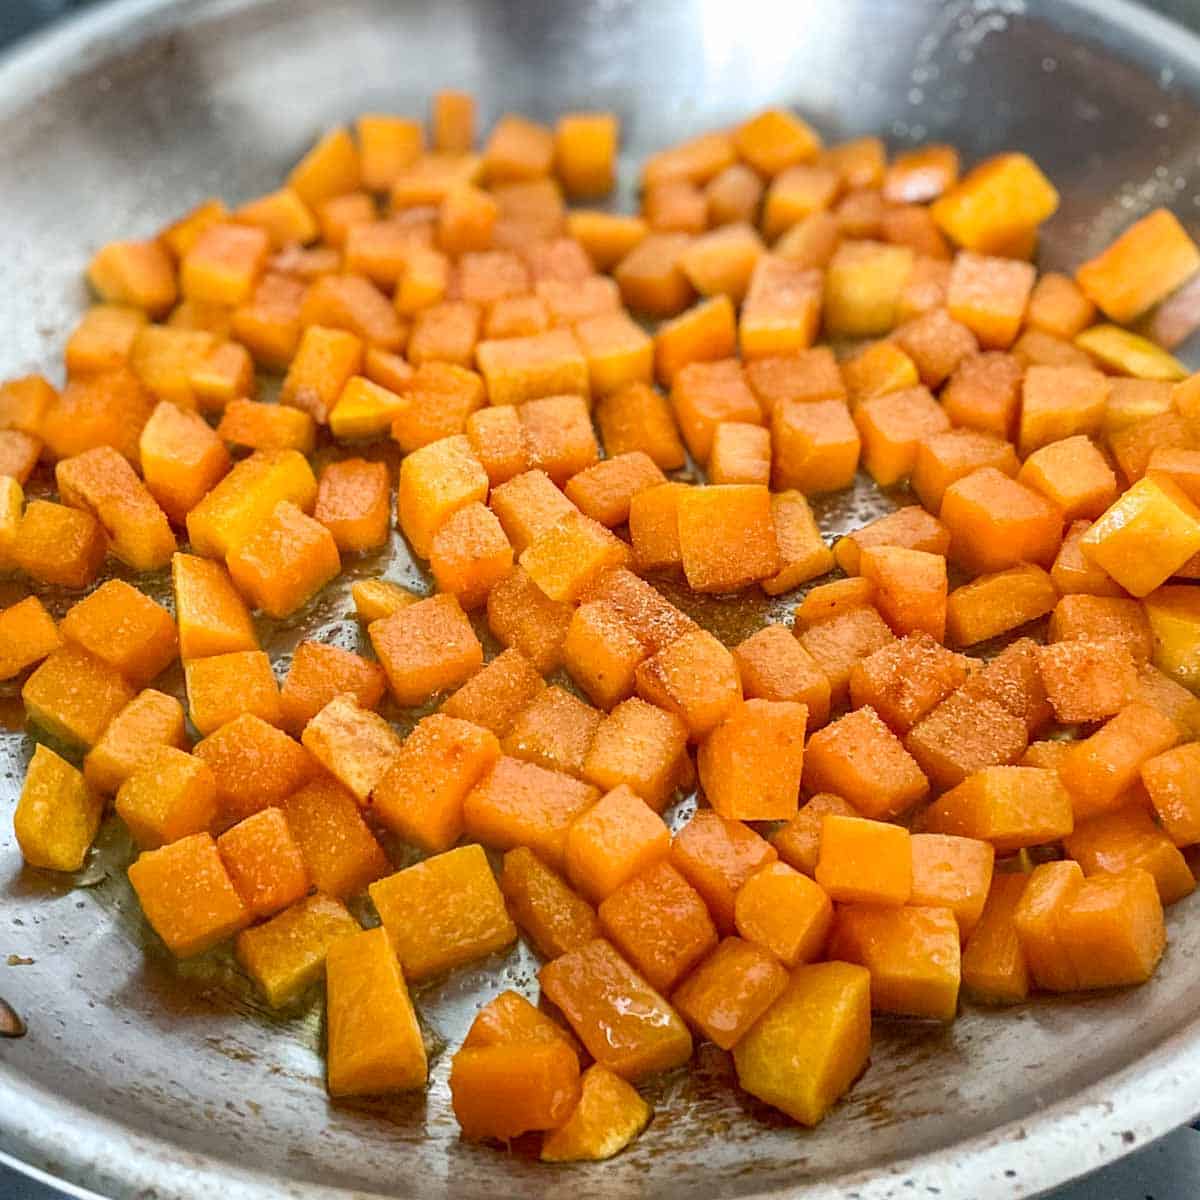 Cubed butternut squash is shown sautéeing in a pan sprinkled with salt, garlic powder, and cayenne.